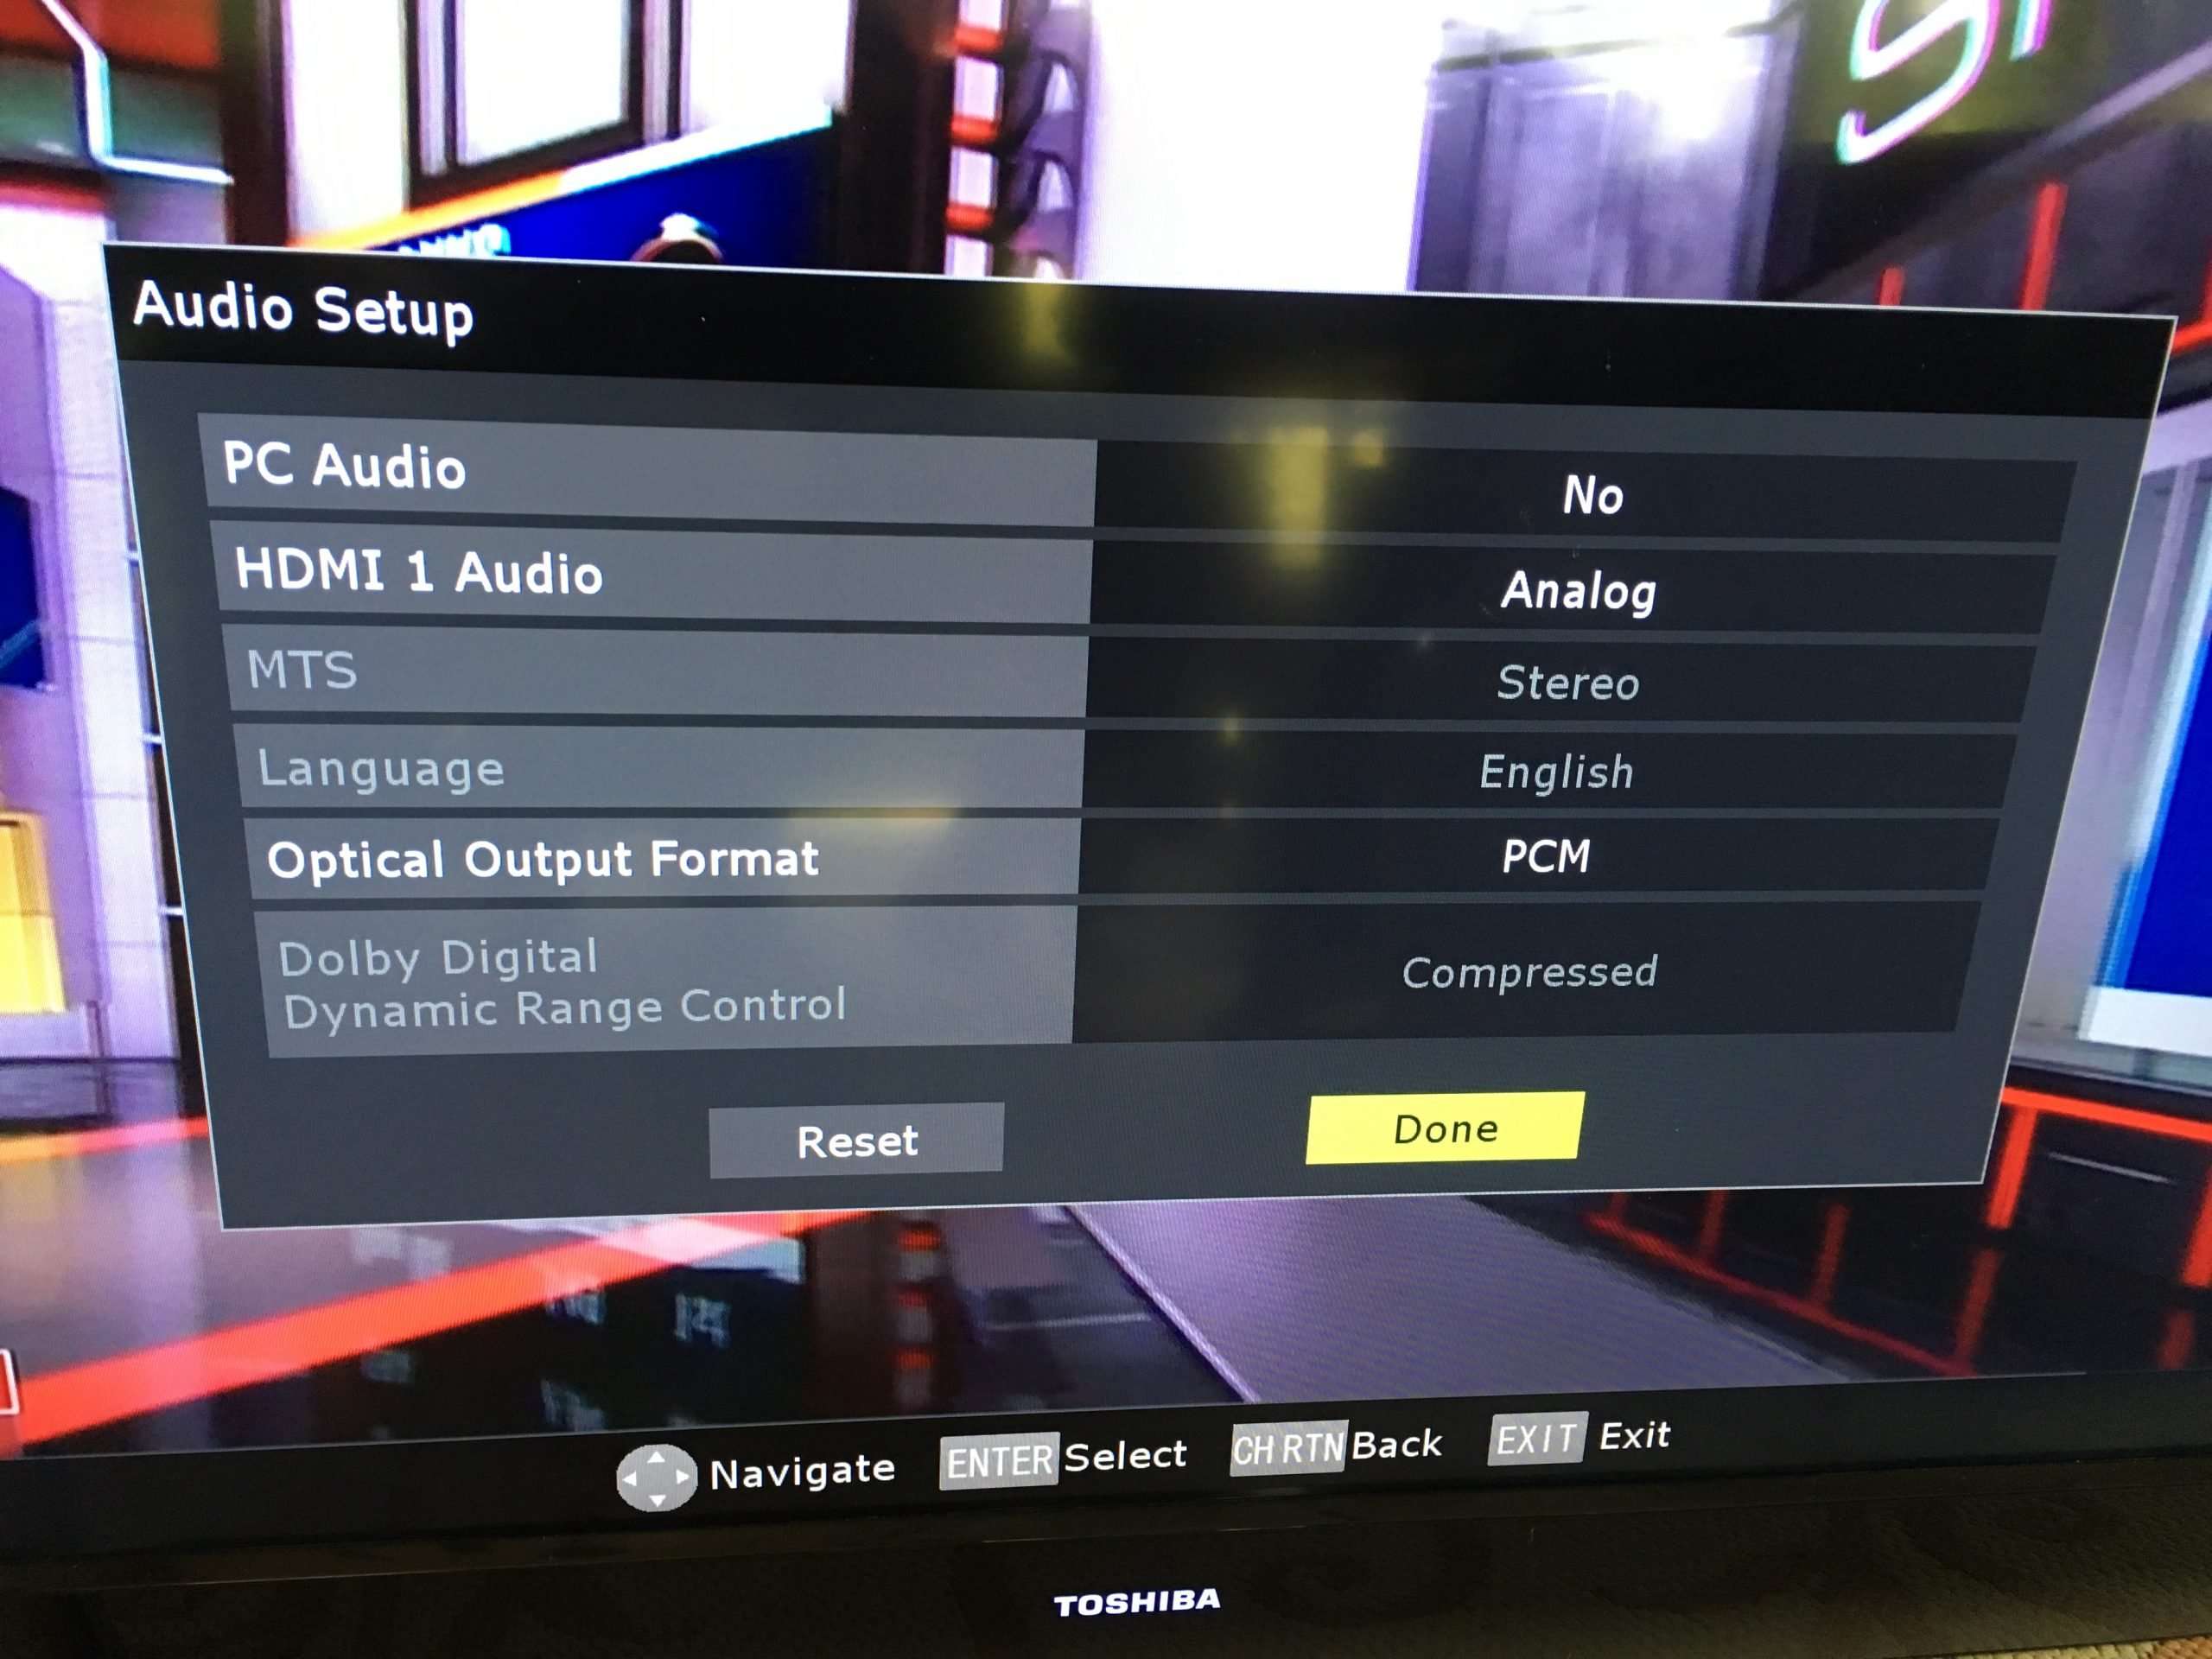 I am trying to connect a vizio sound bar to a Toshiba flat ...